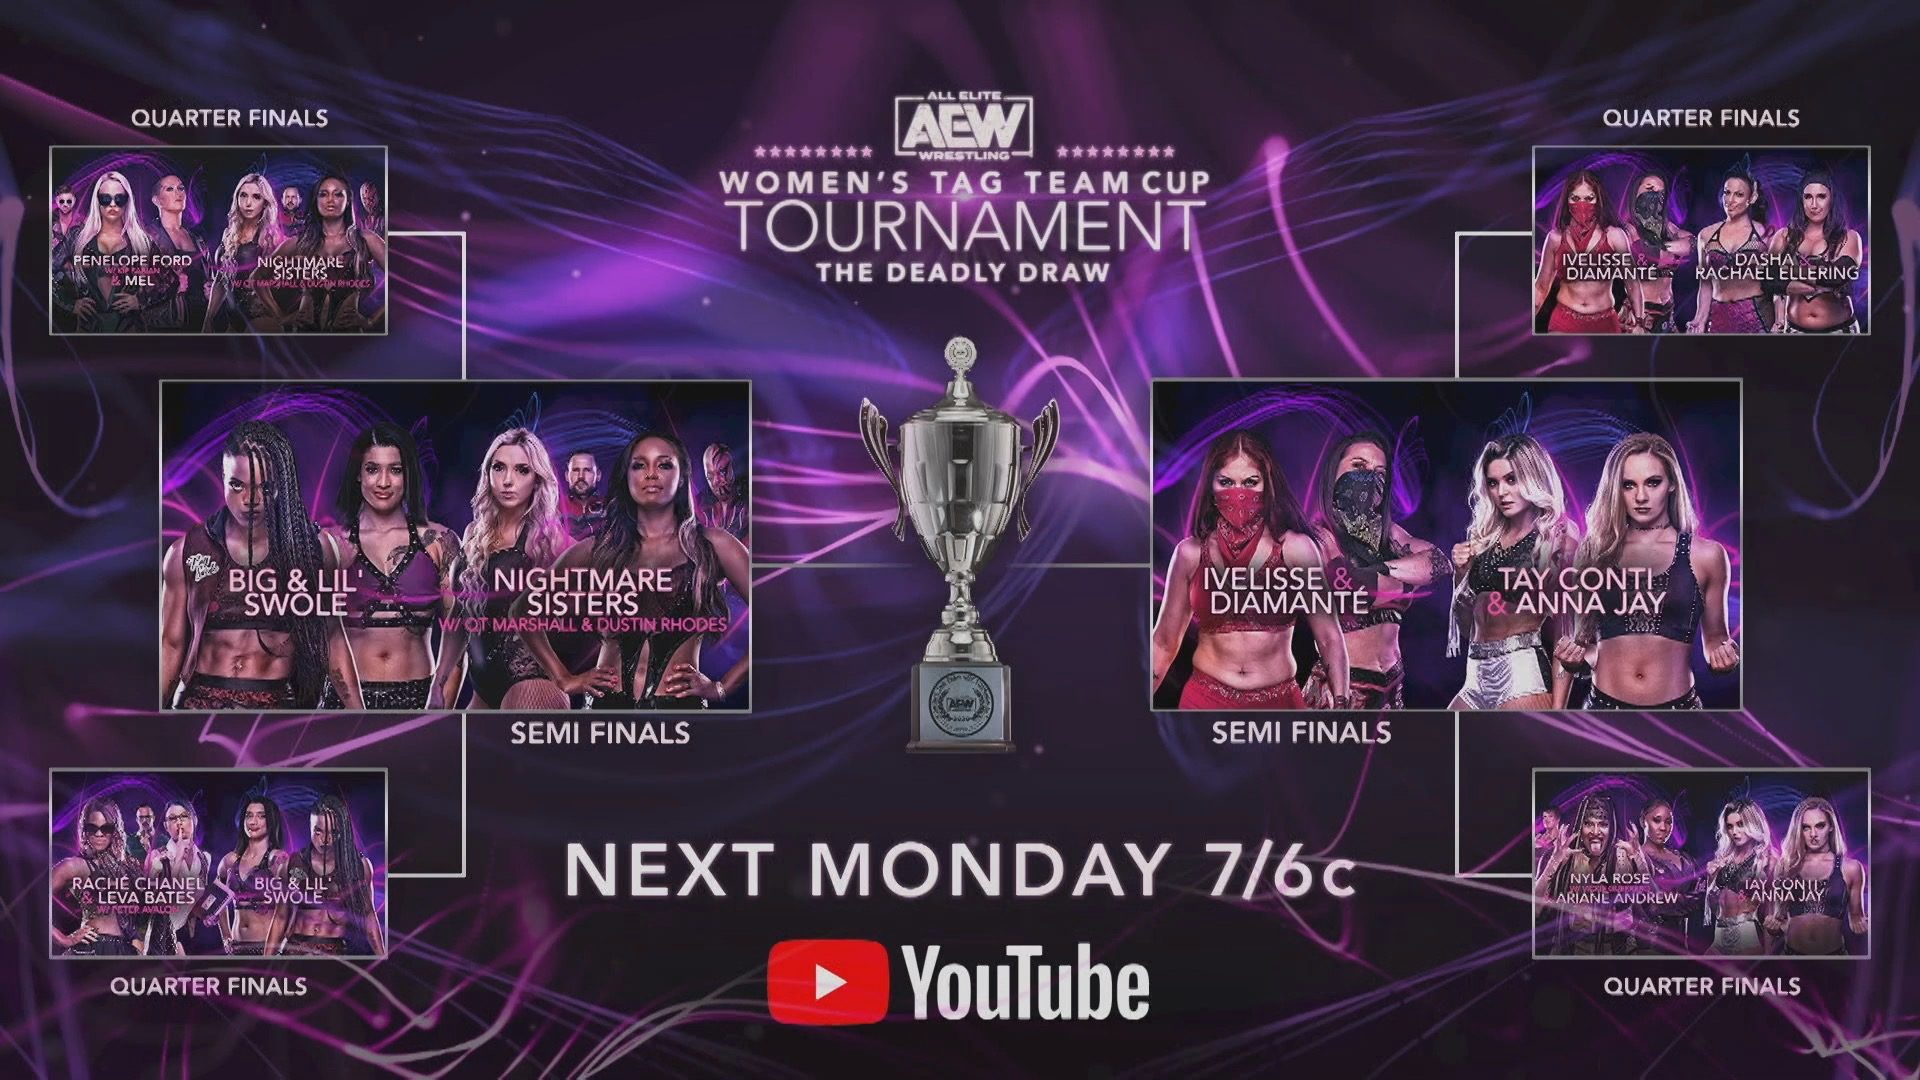 AEW Women’s Tag Team Cup Tournament – Semifinales